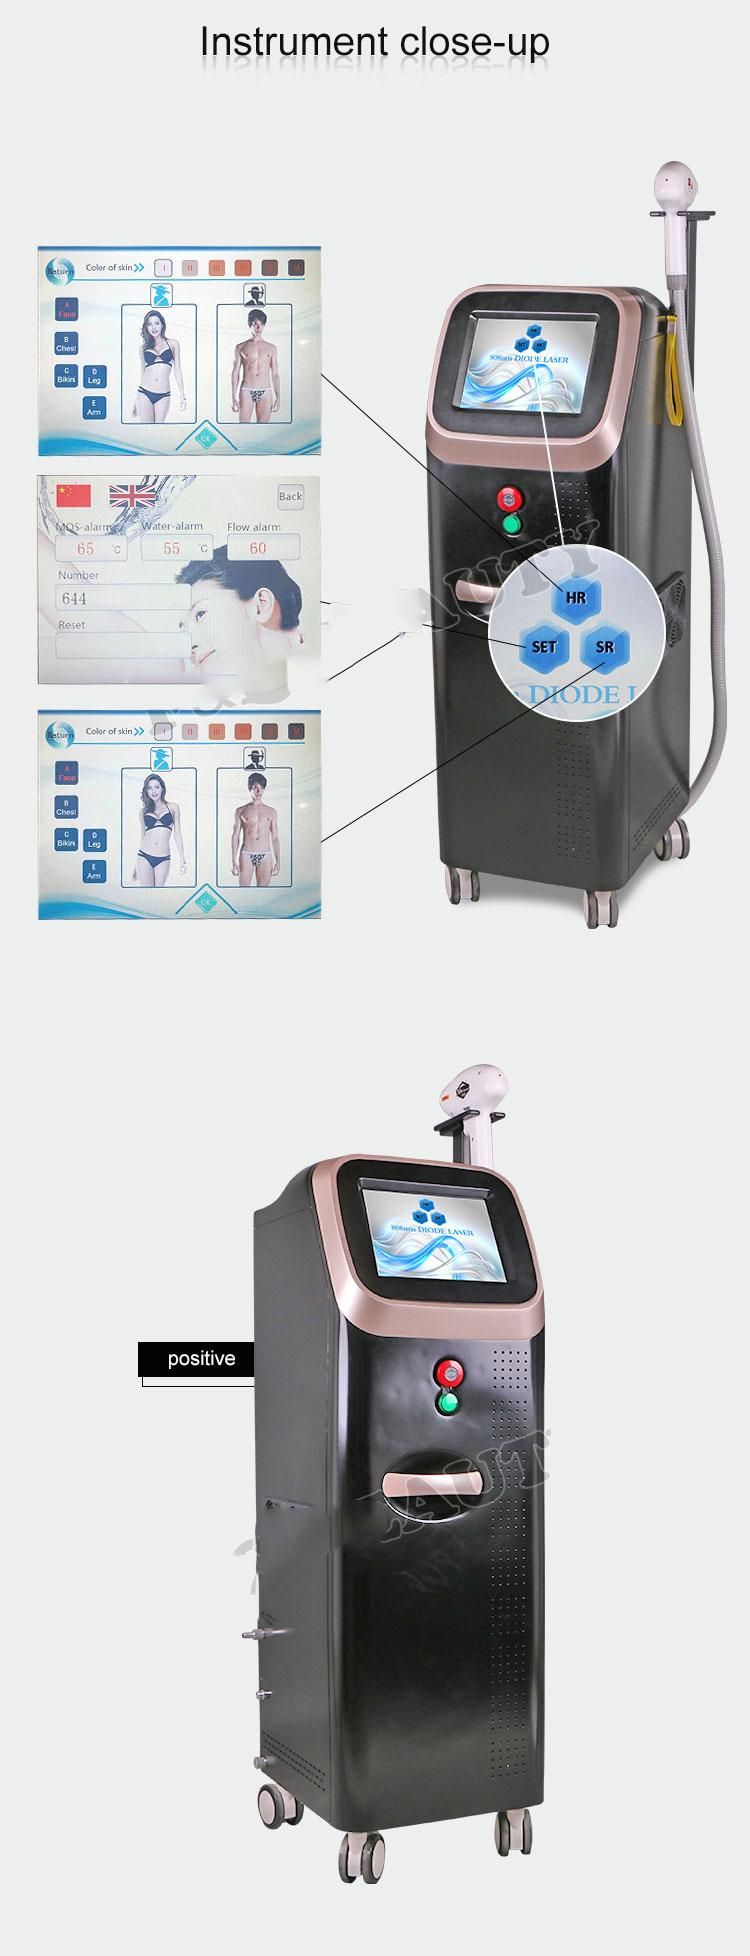 808nm Diode Laser Machine Diode Laser Hair Removal Salon Clinic Beauty Machine